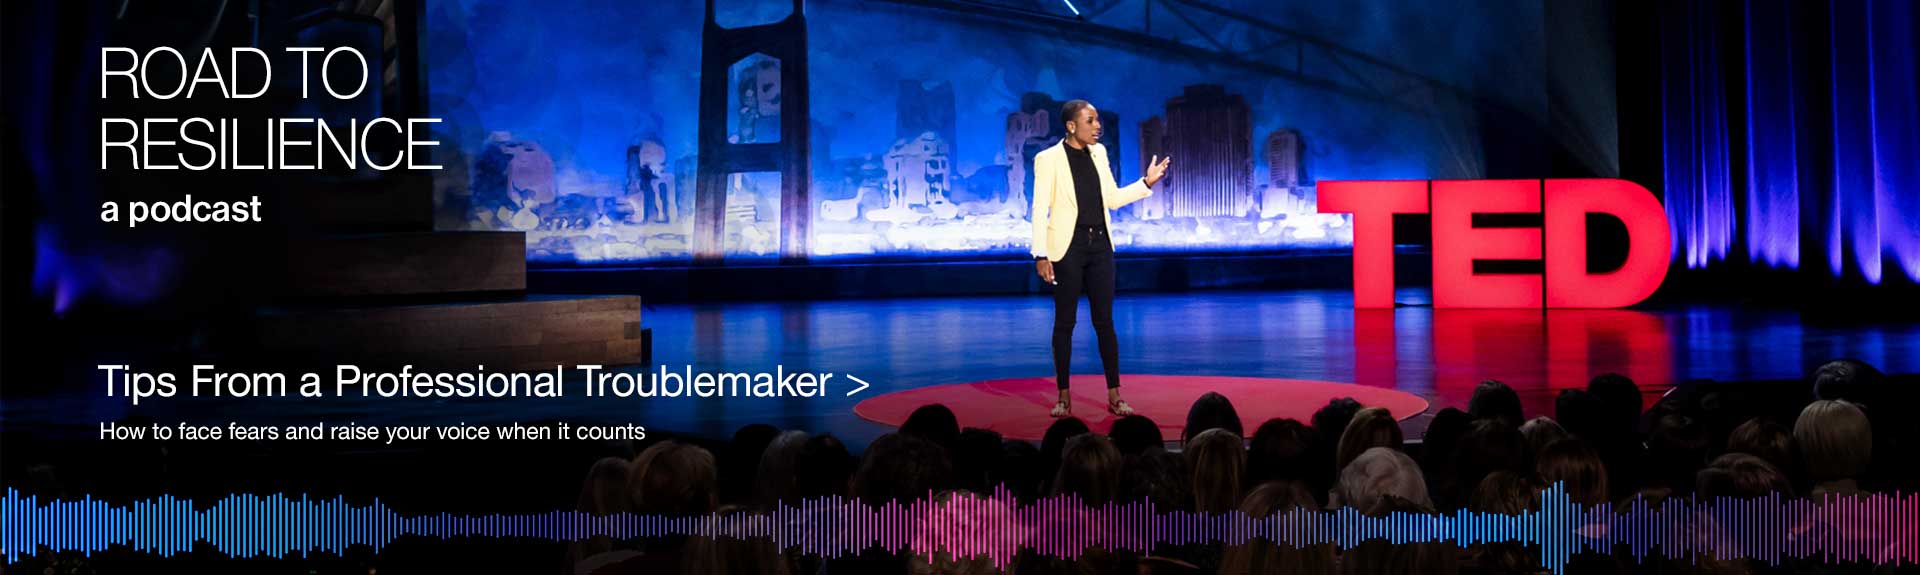 Luvvie Ajayi Jones at her TED Talk